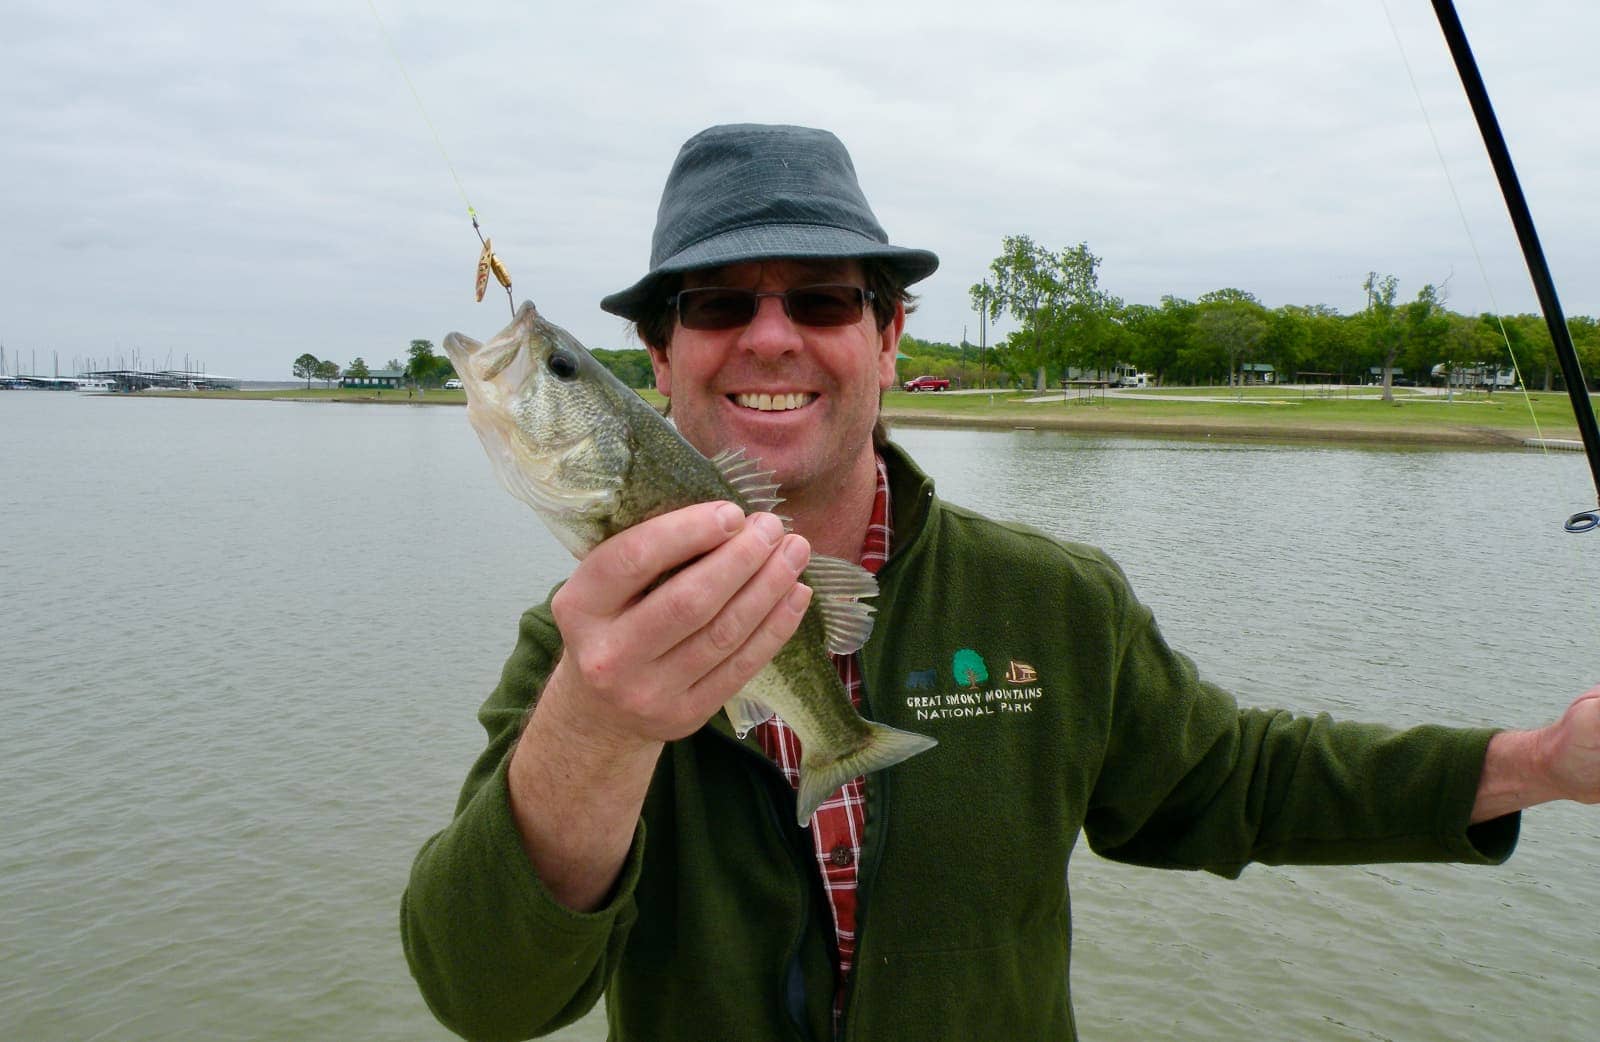 Man with hat and green jacket holding small fish